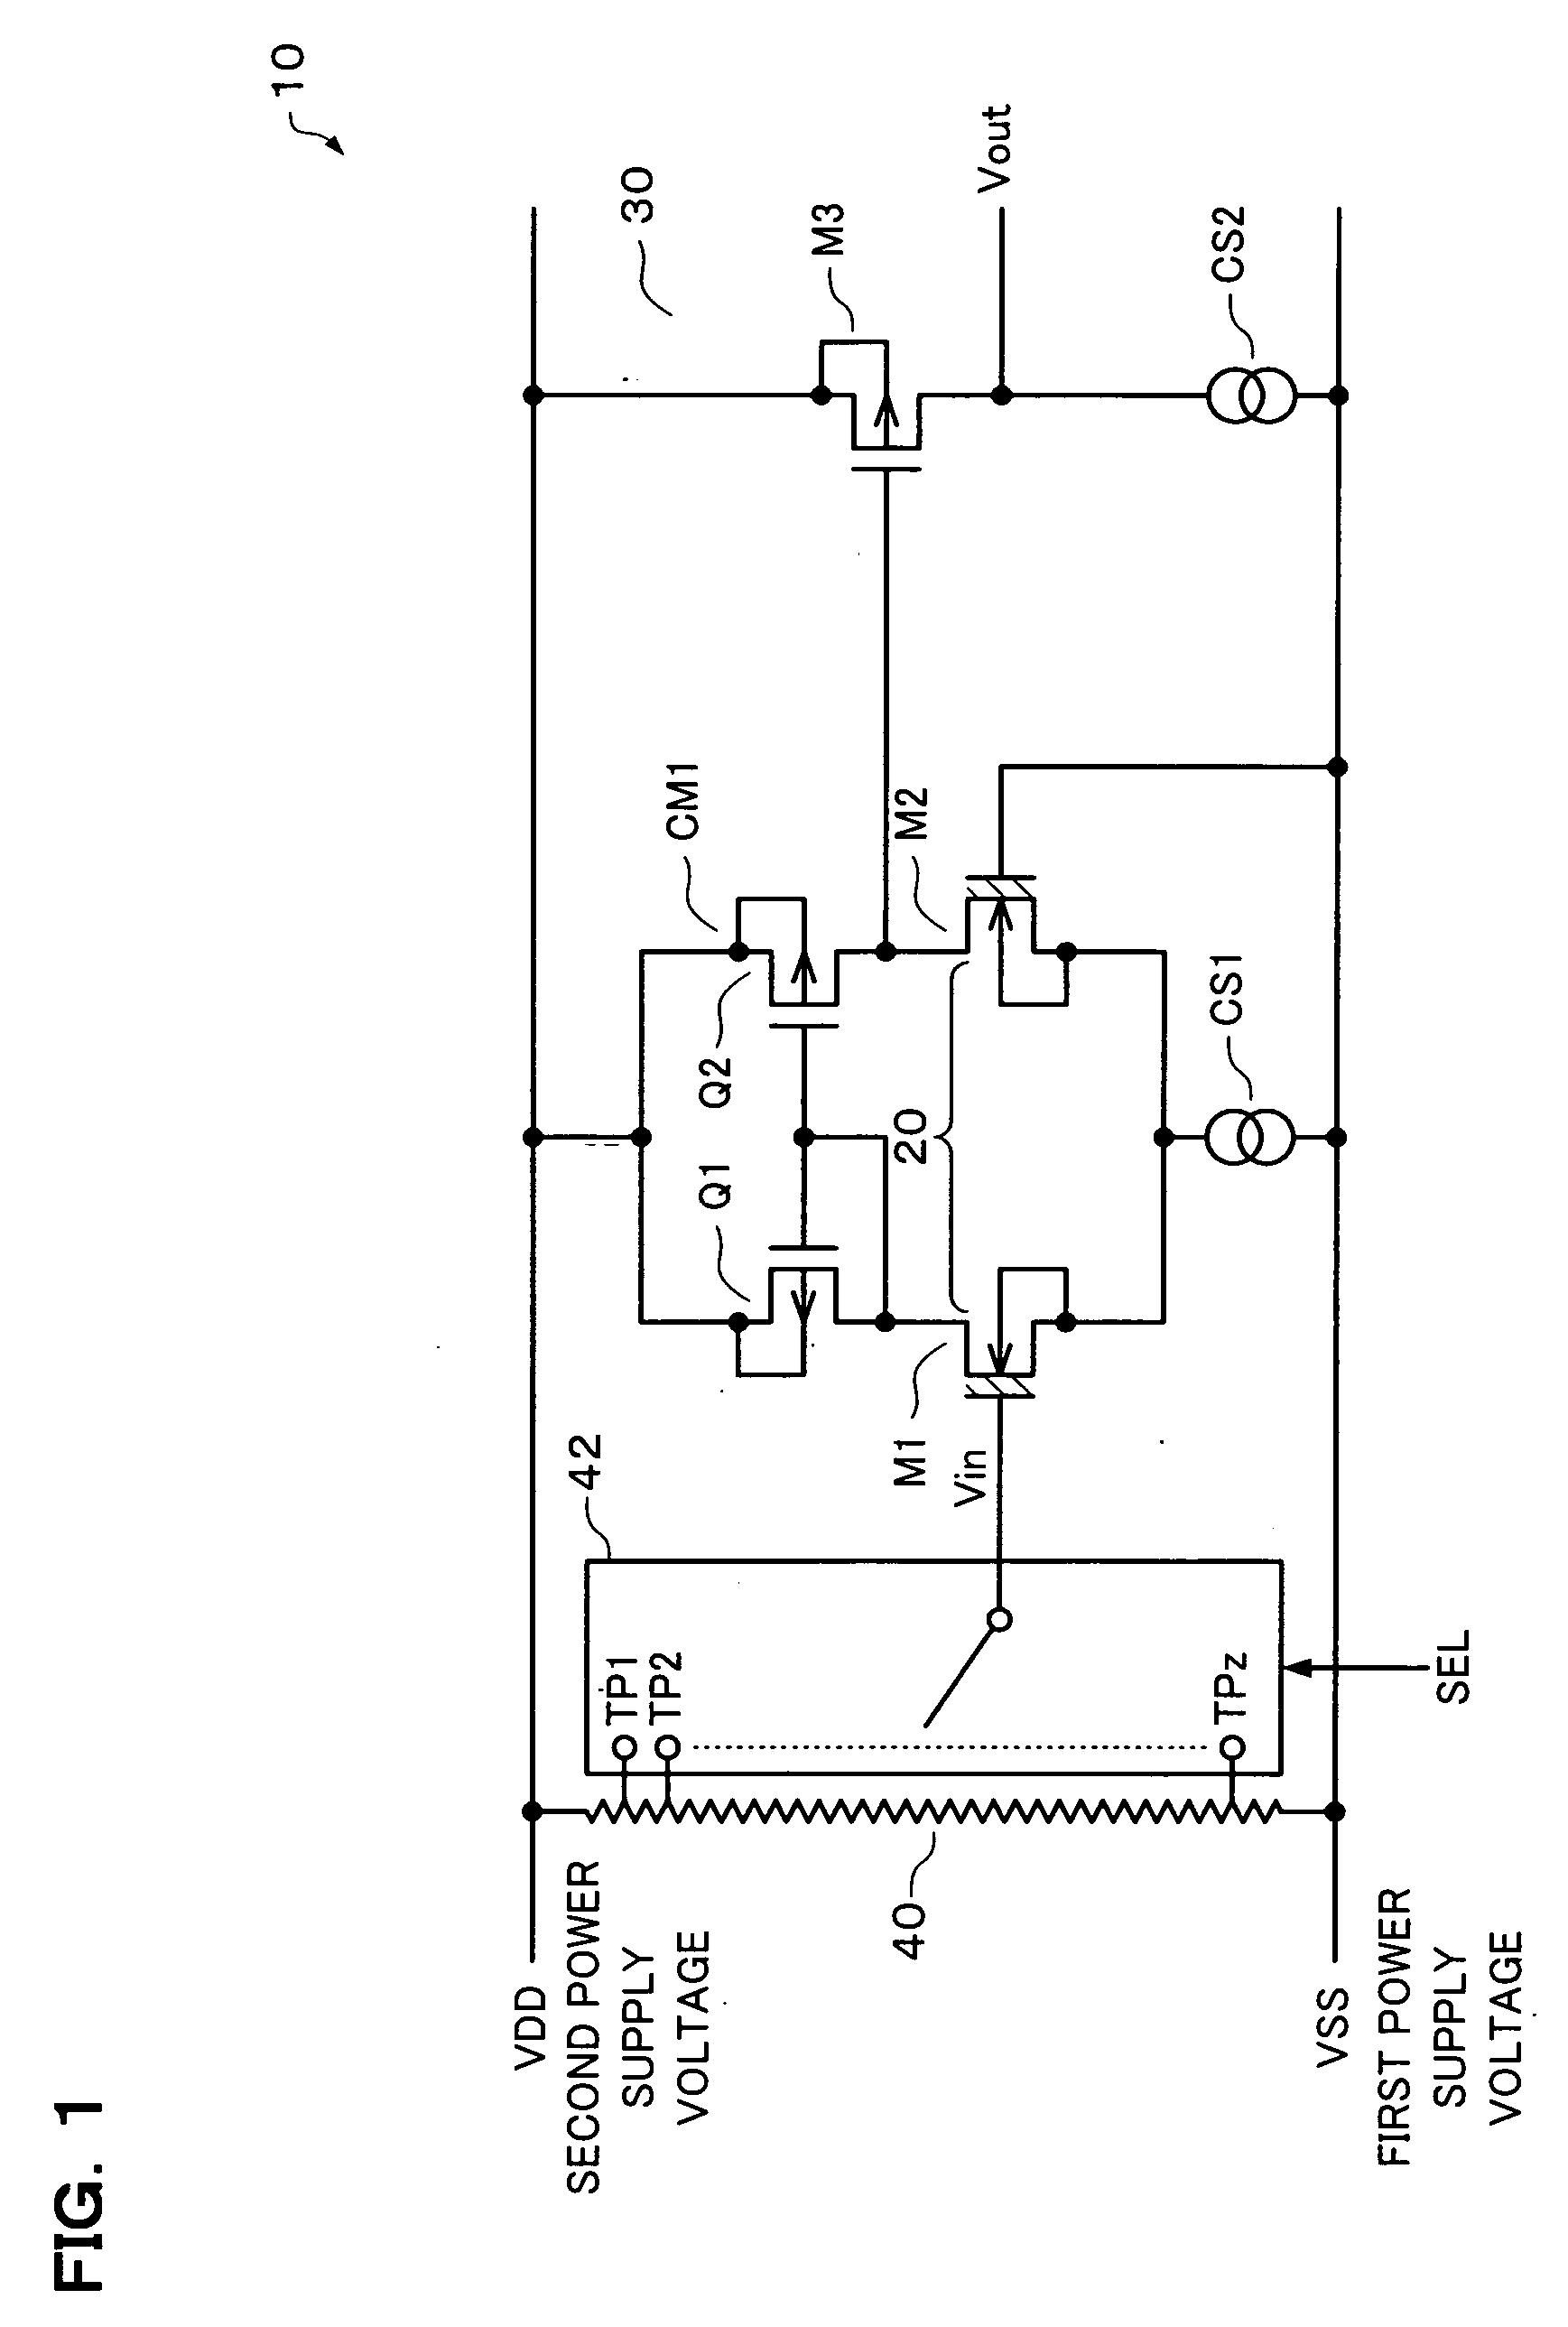 Comparator circuit and power supply circuit